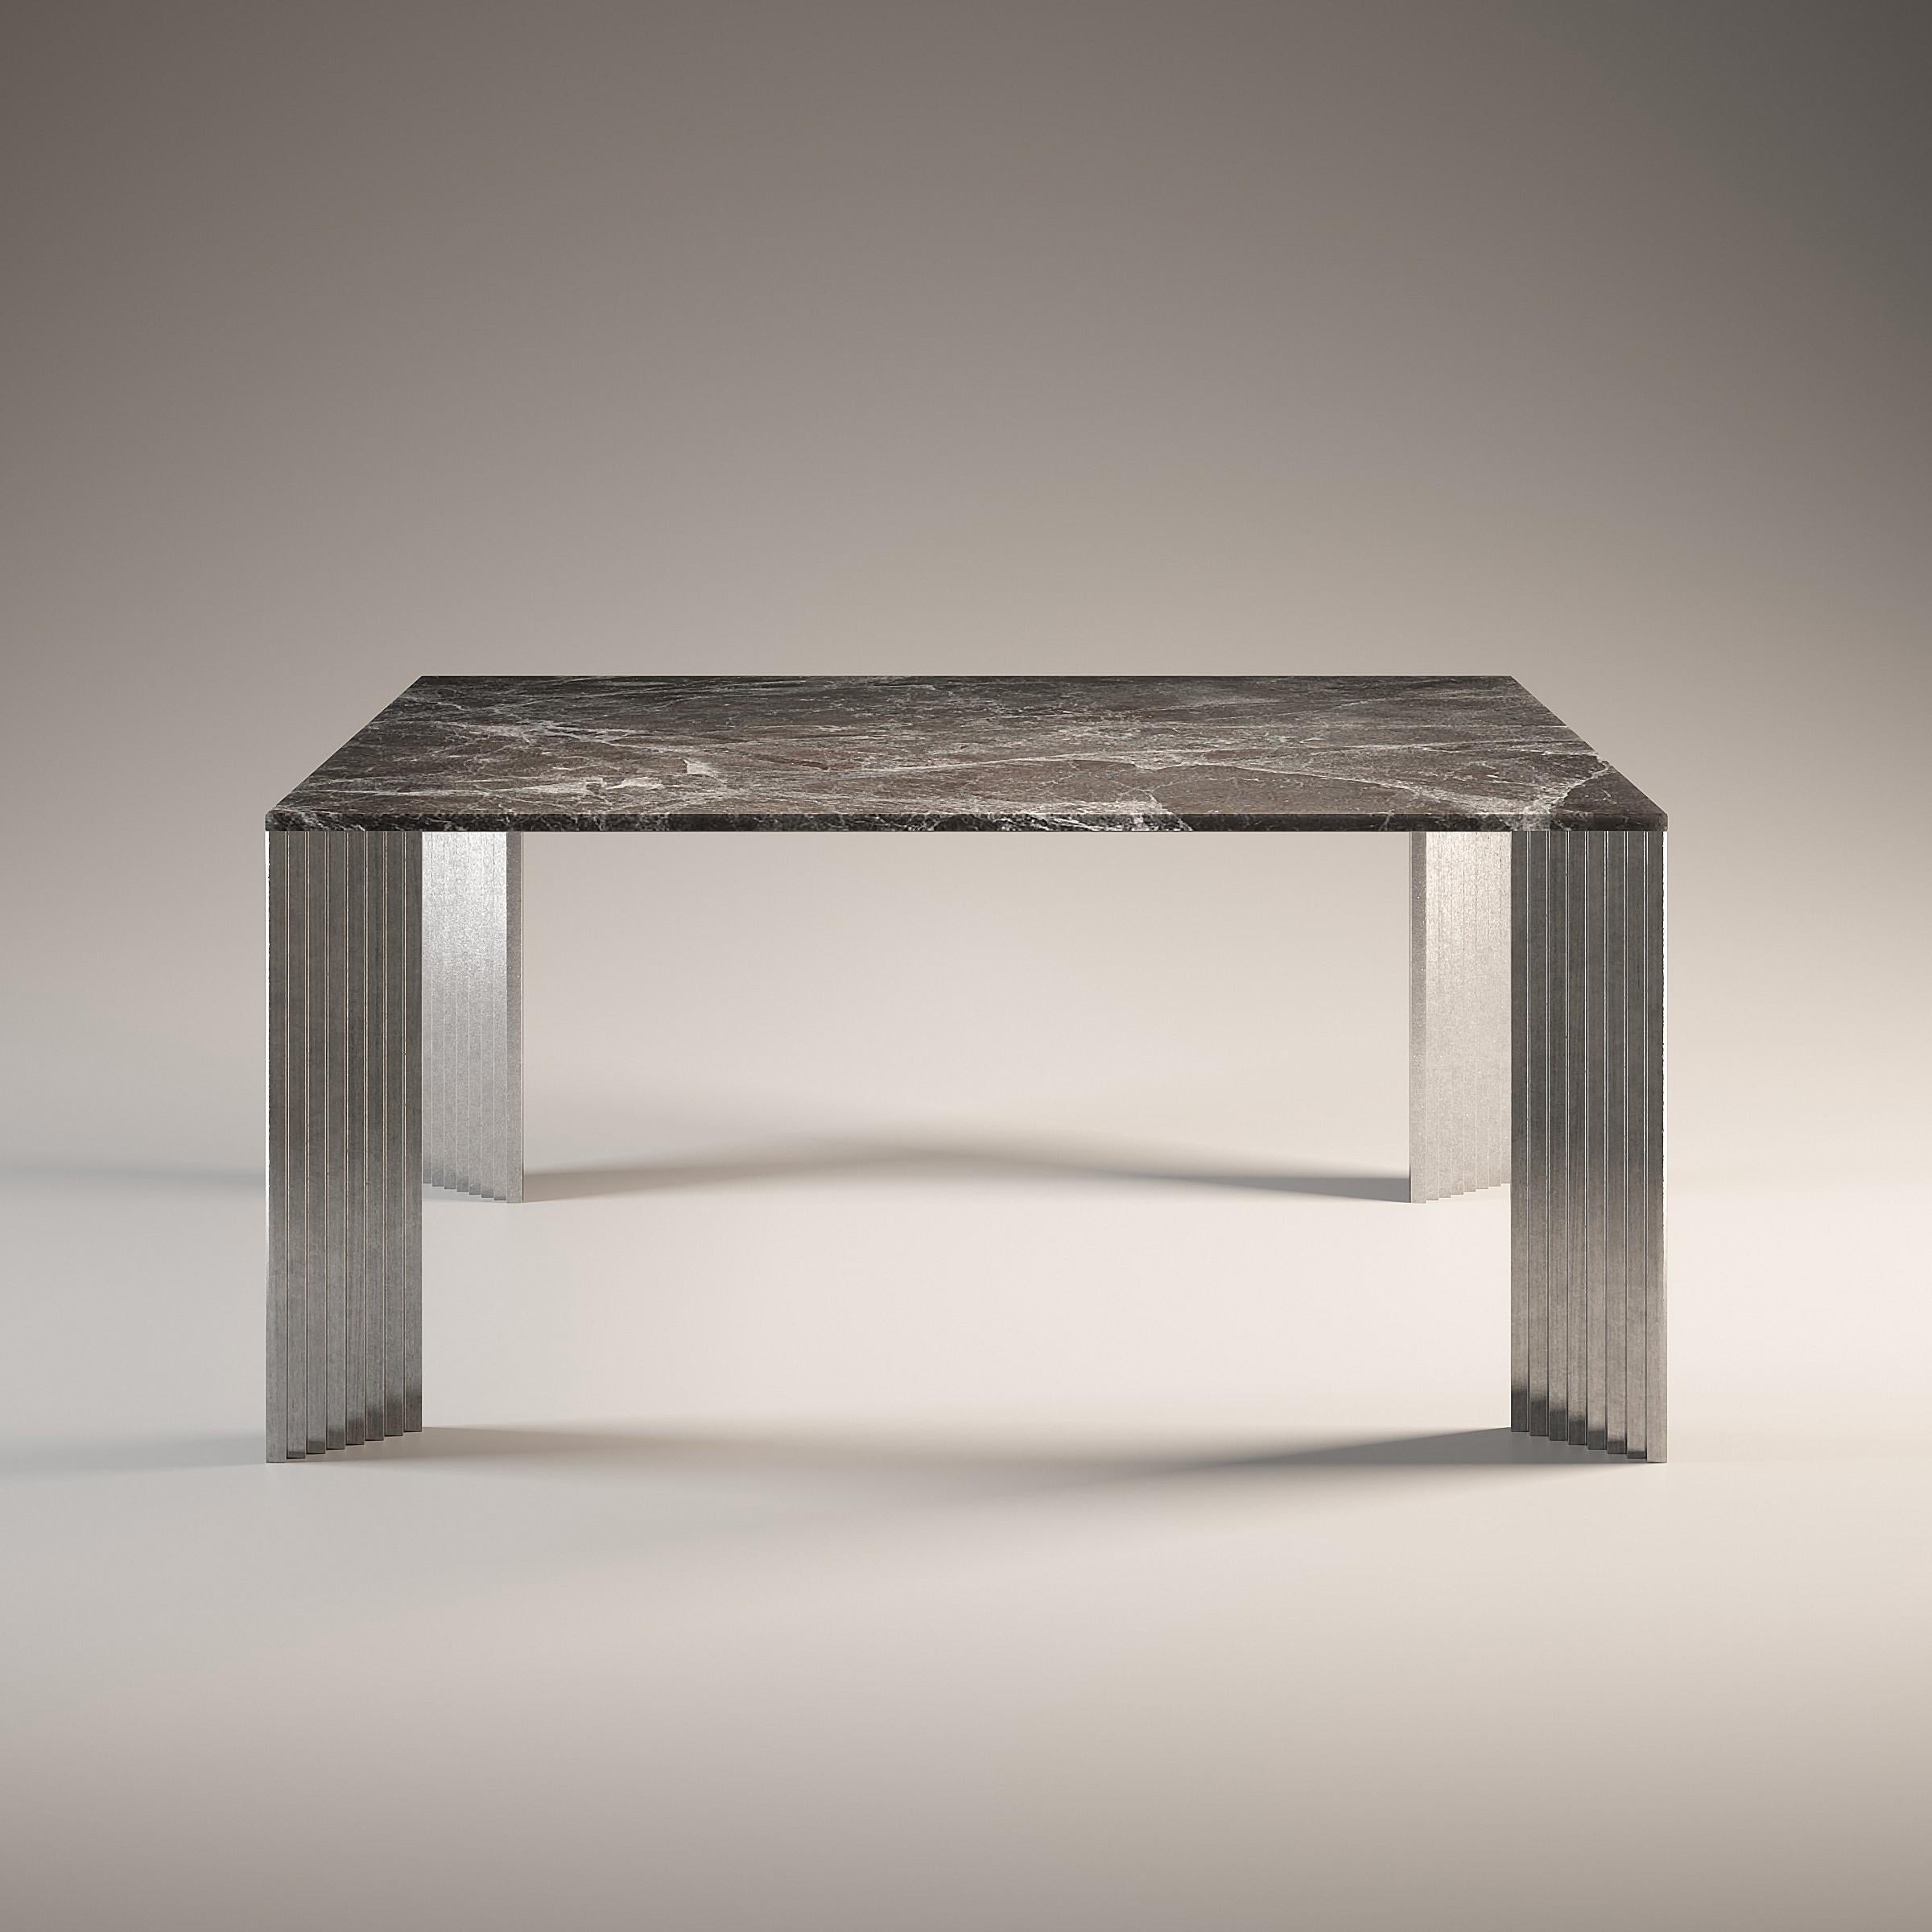 Piero Emperador Grey Dining Table by Fred and Juul
Dimensions: D 160 x W 160 x H 74 cm.
Materials: Emperador Grey marble and aluminum.

Available in Rosa Tea or Emperador Grey marble tops. Available in bronze or aluminum legs. Custom sizes,